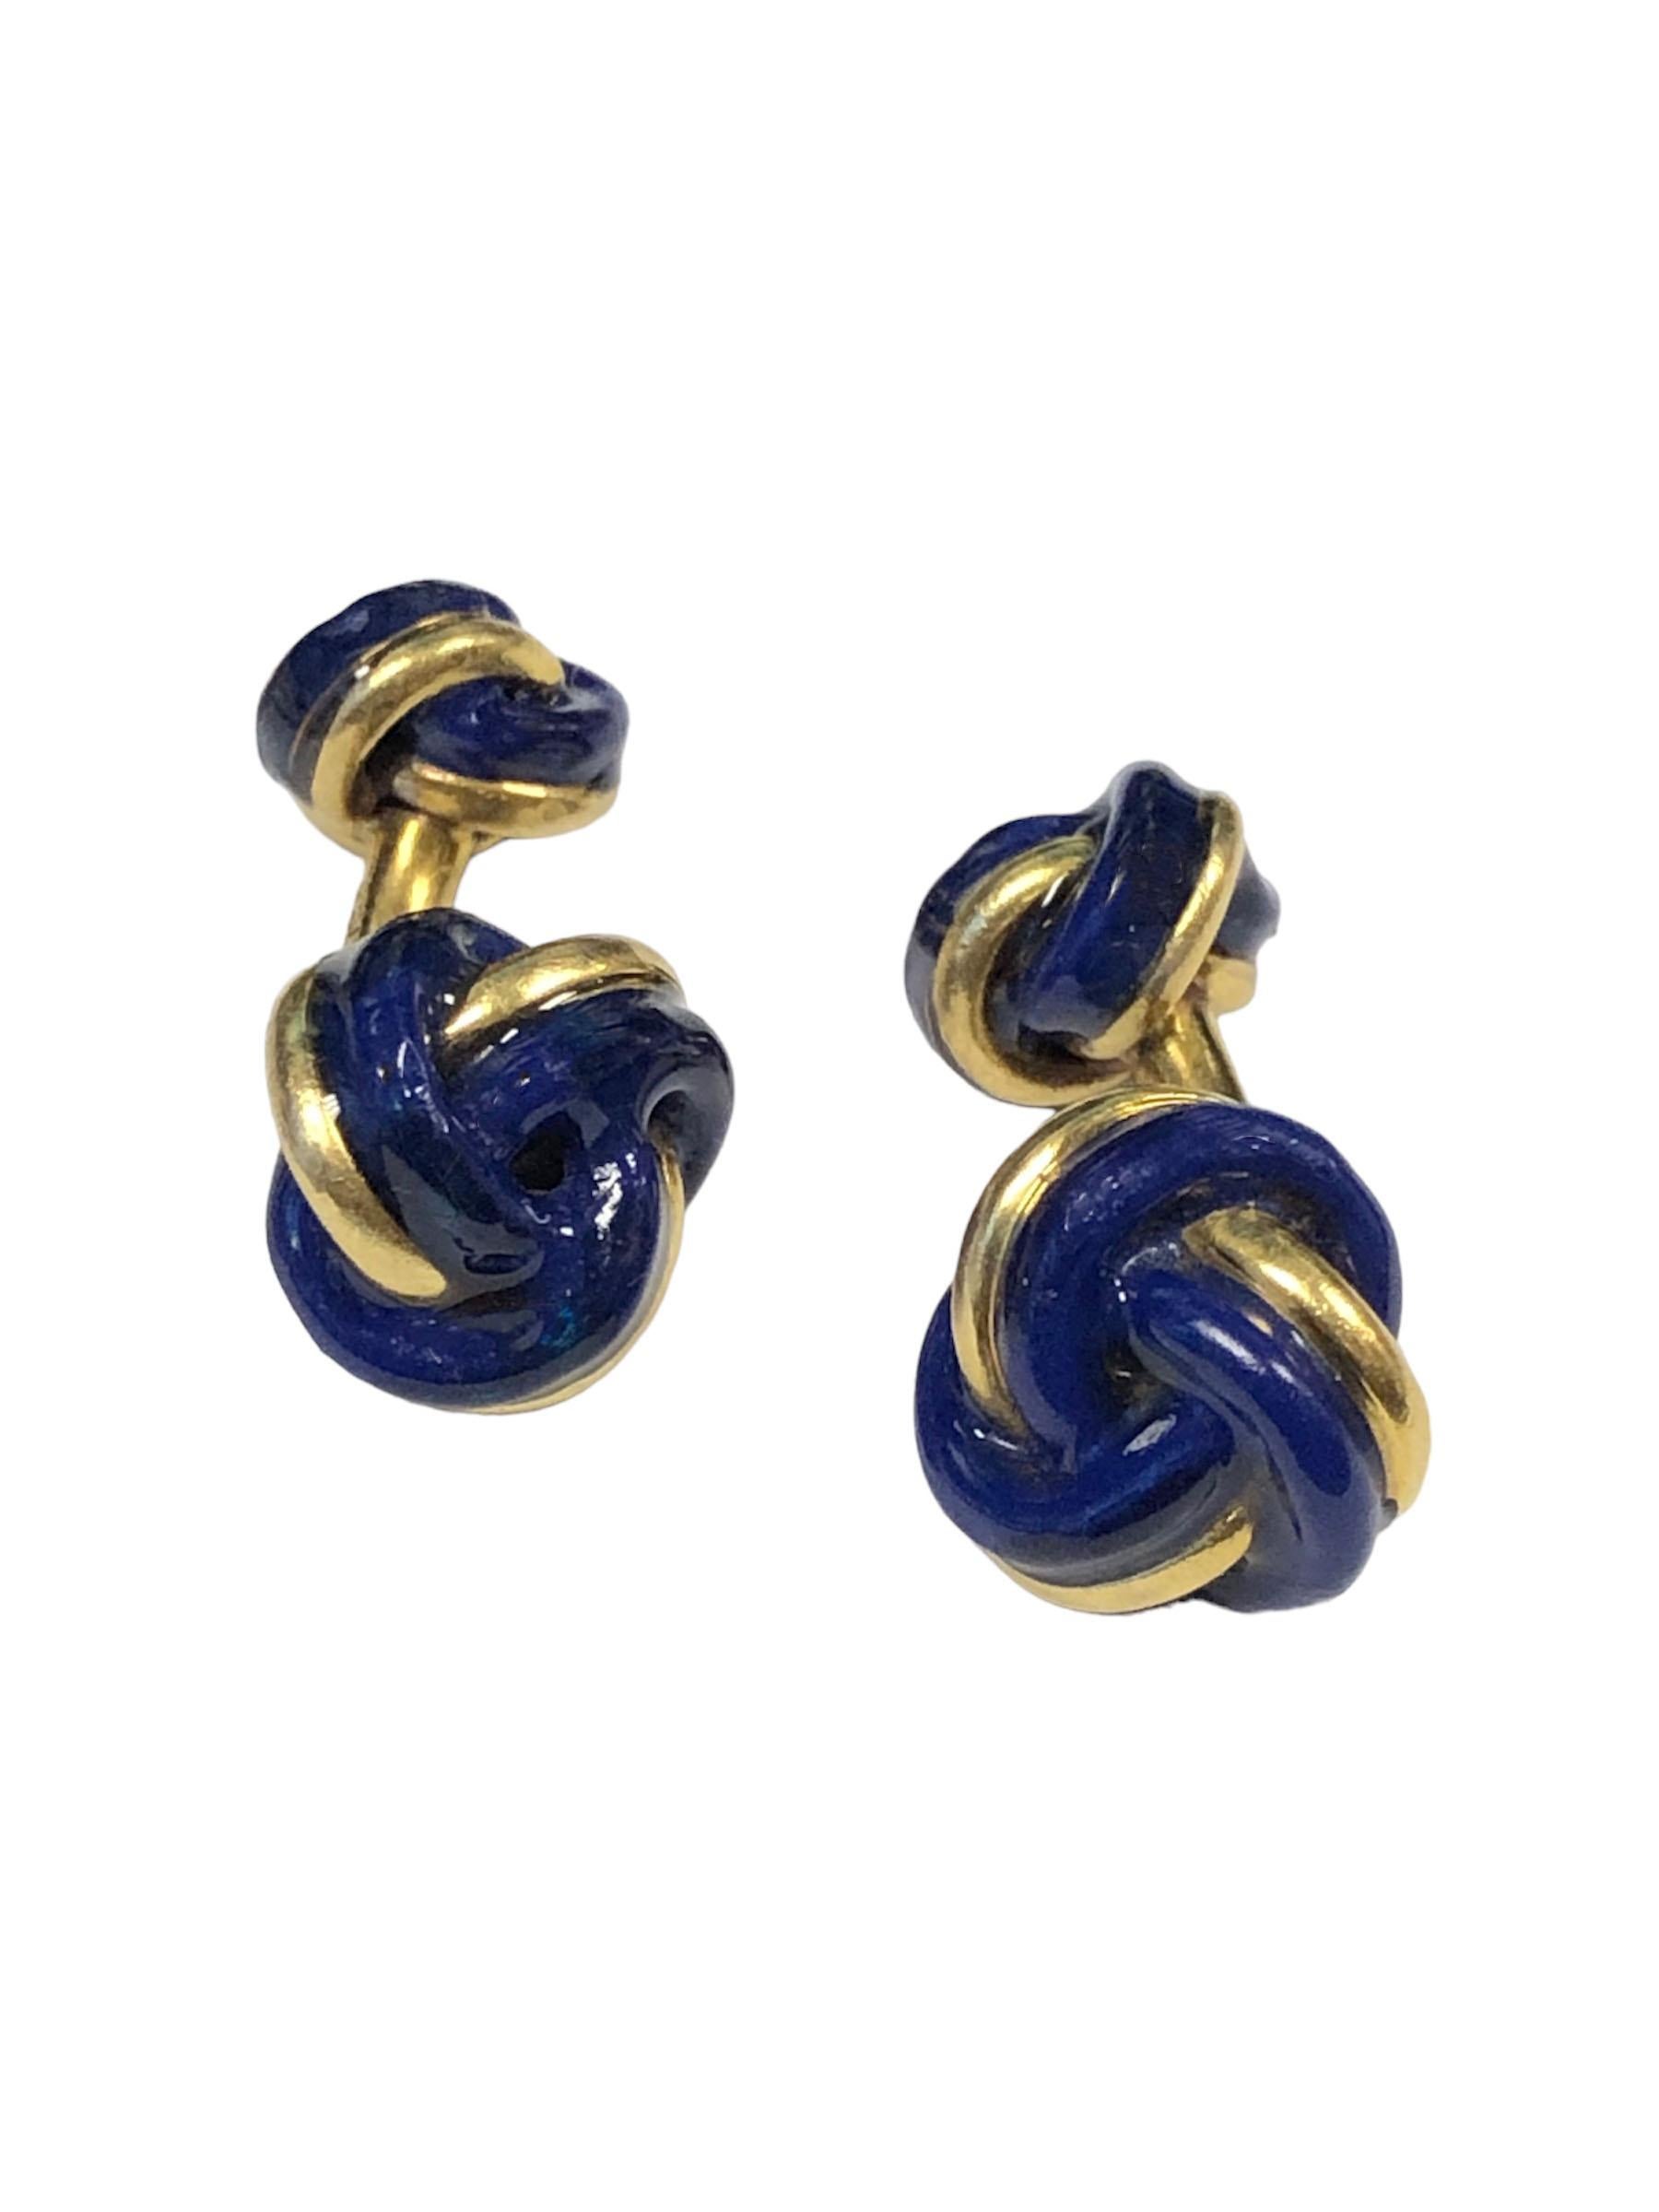 Tiffany & Company 18k and Cobalt Enamel Classic Knot Cufflinks In Excellent Condition For Sale In Chicago, IL